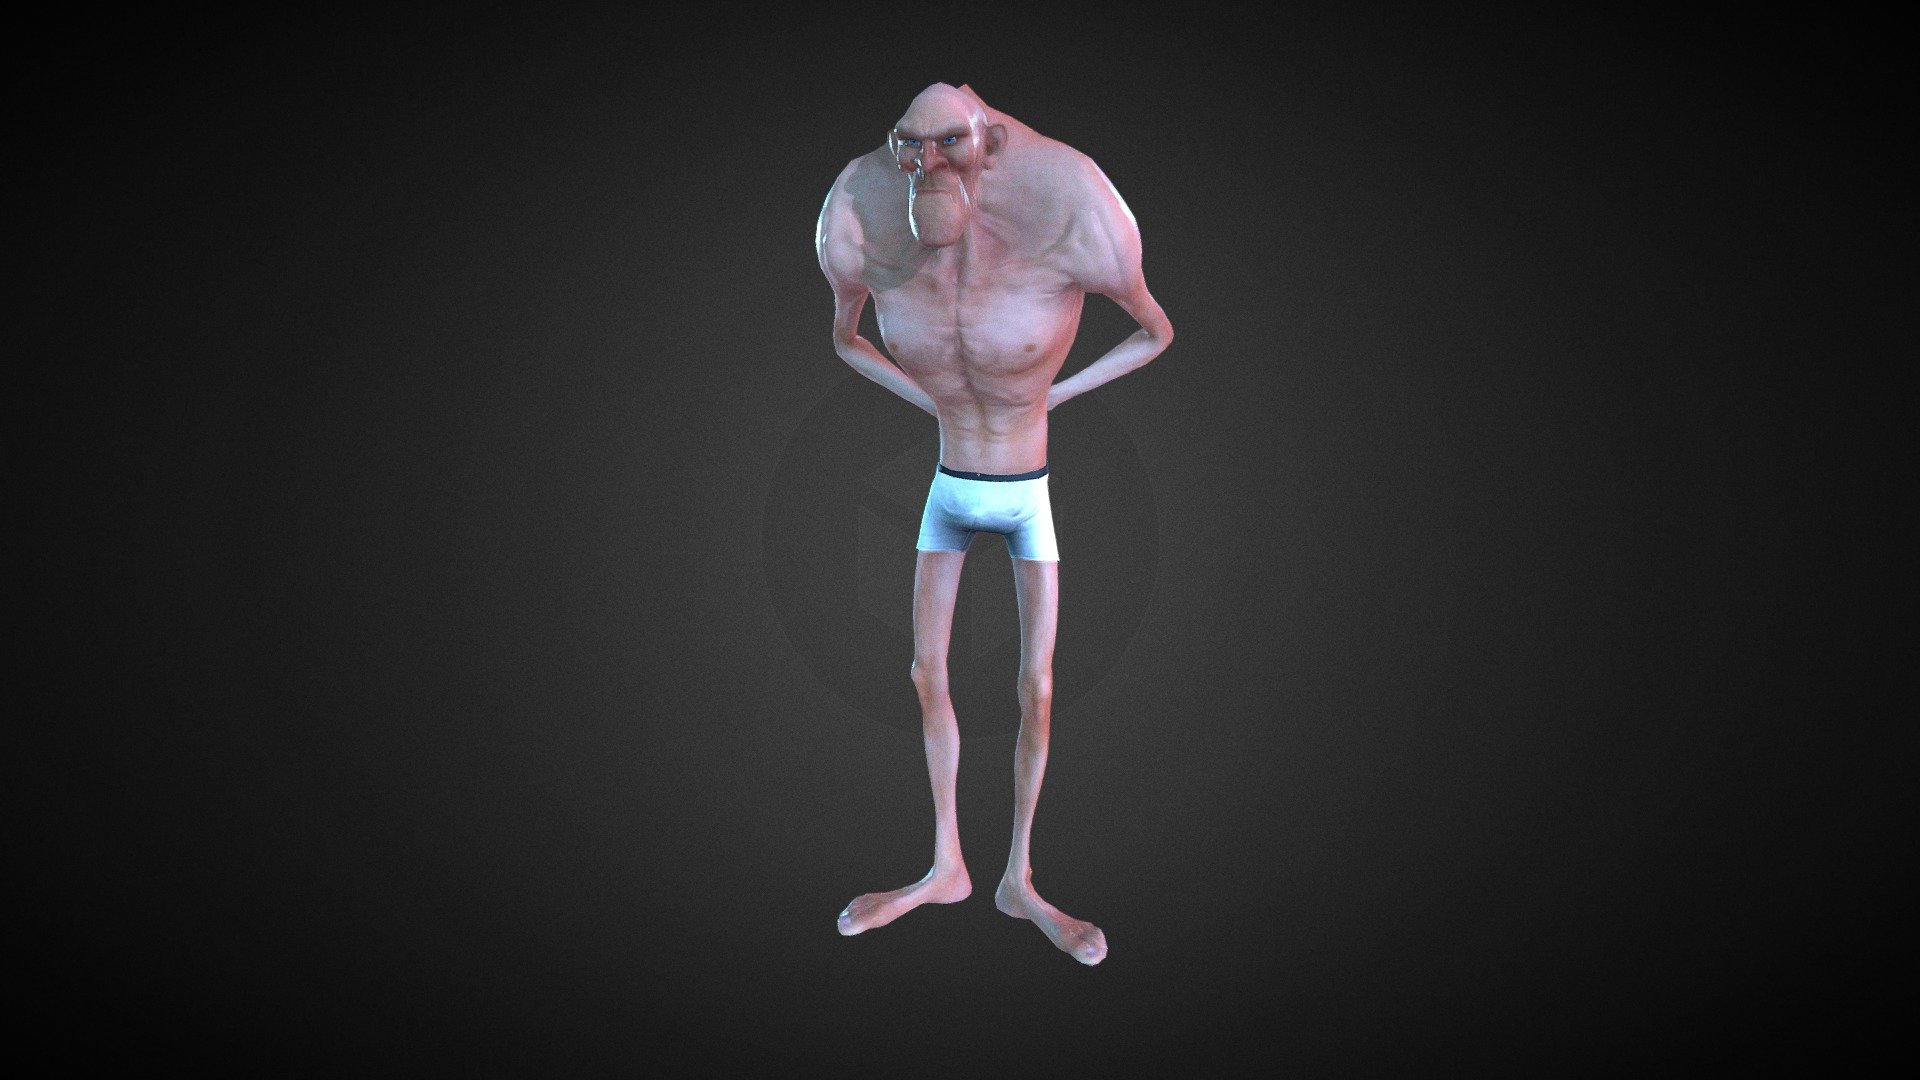 CC Walter Morph from my OLDIES character pack. Check out all my CC character morphs here:

https://www.reallusion.com/contentstore/featureddeveloper/profile/#!/ToKoMotion/Character%20Creator - iClone Character Creator - Walter Morph - 3D model by ToKoMotion 3d model